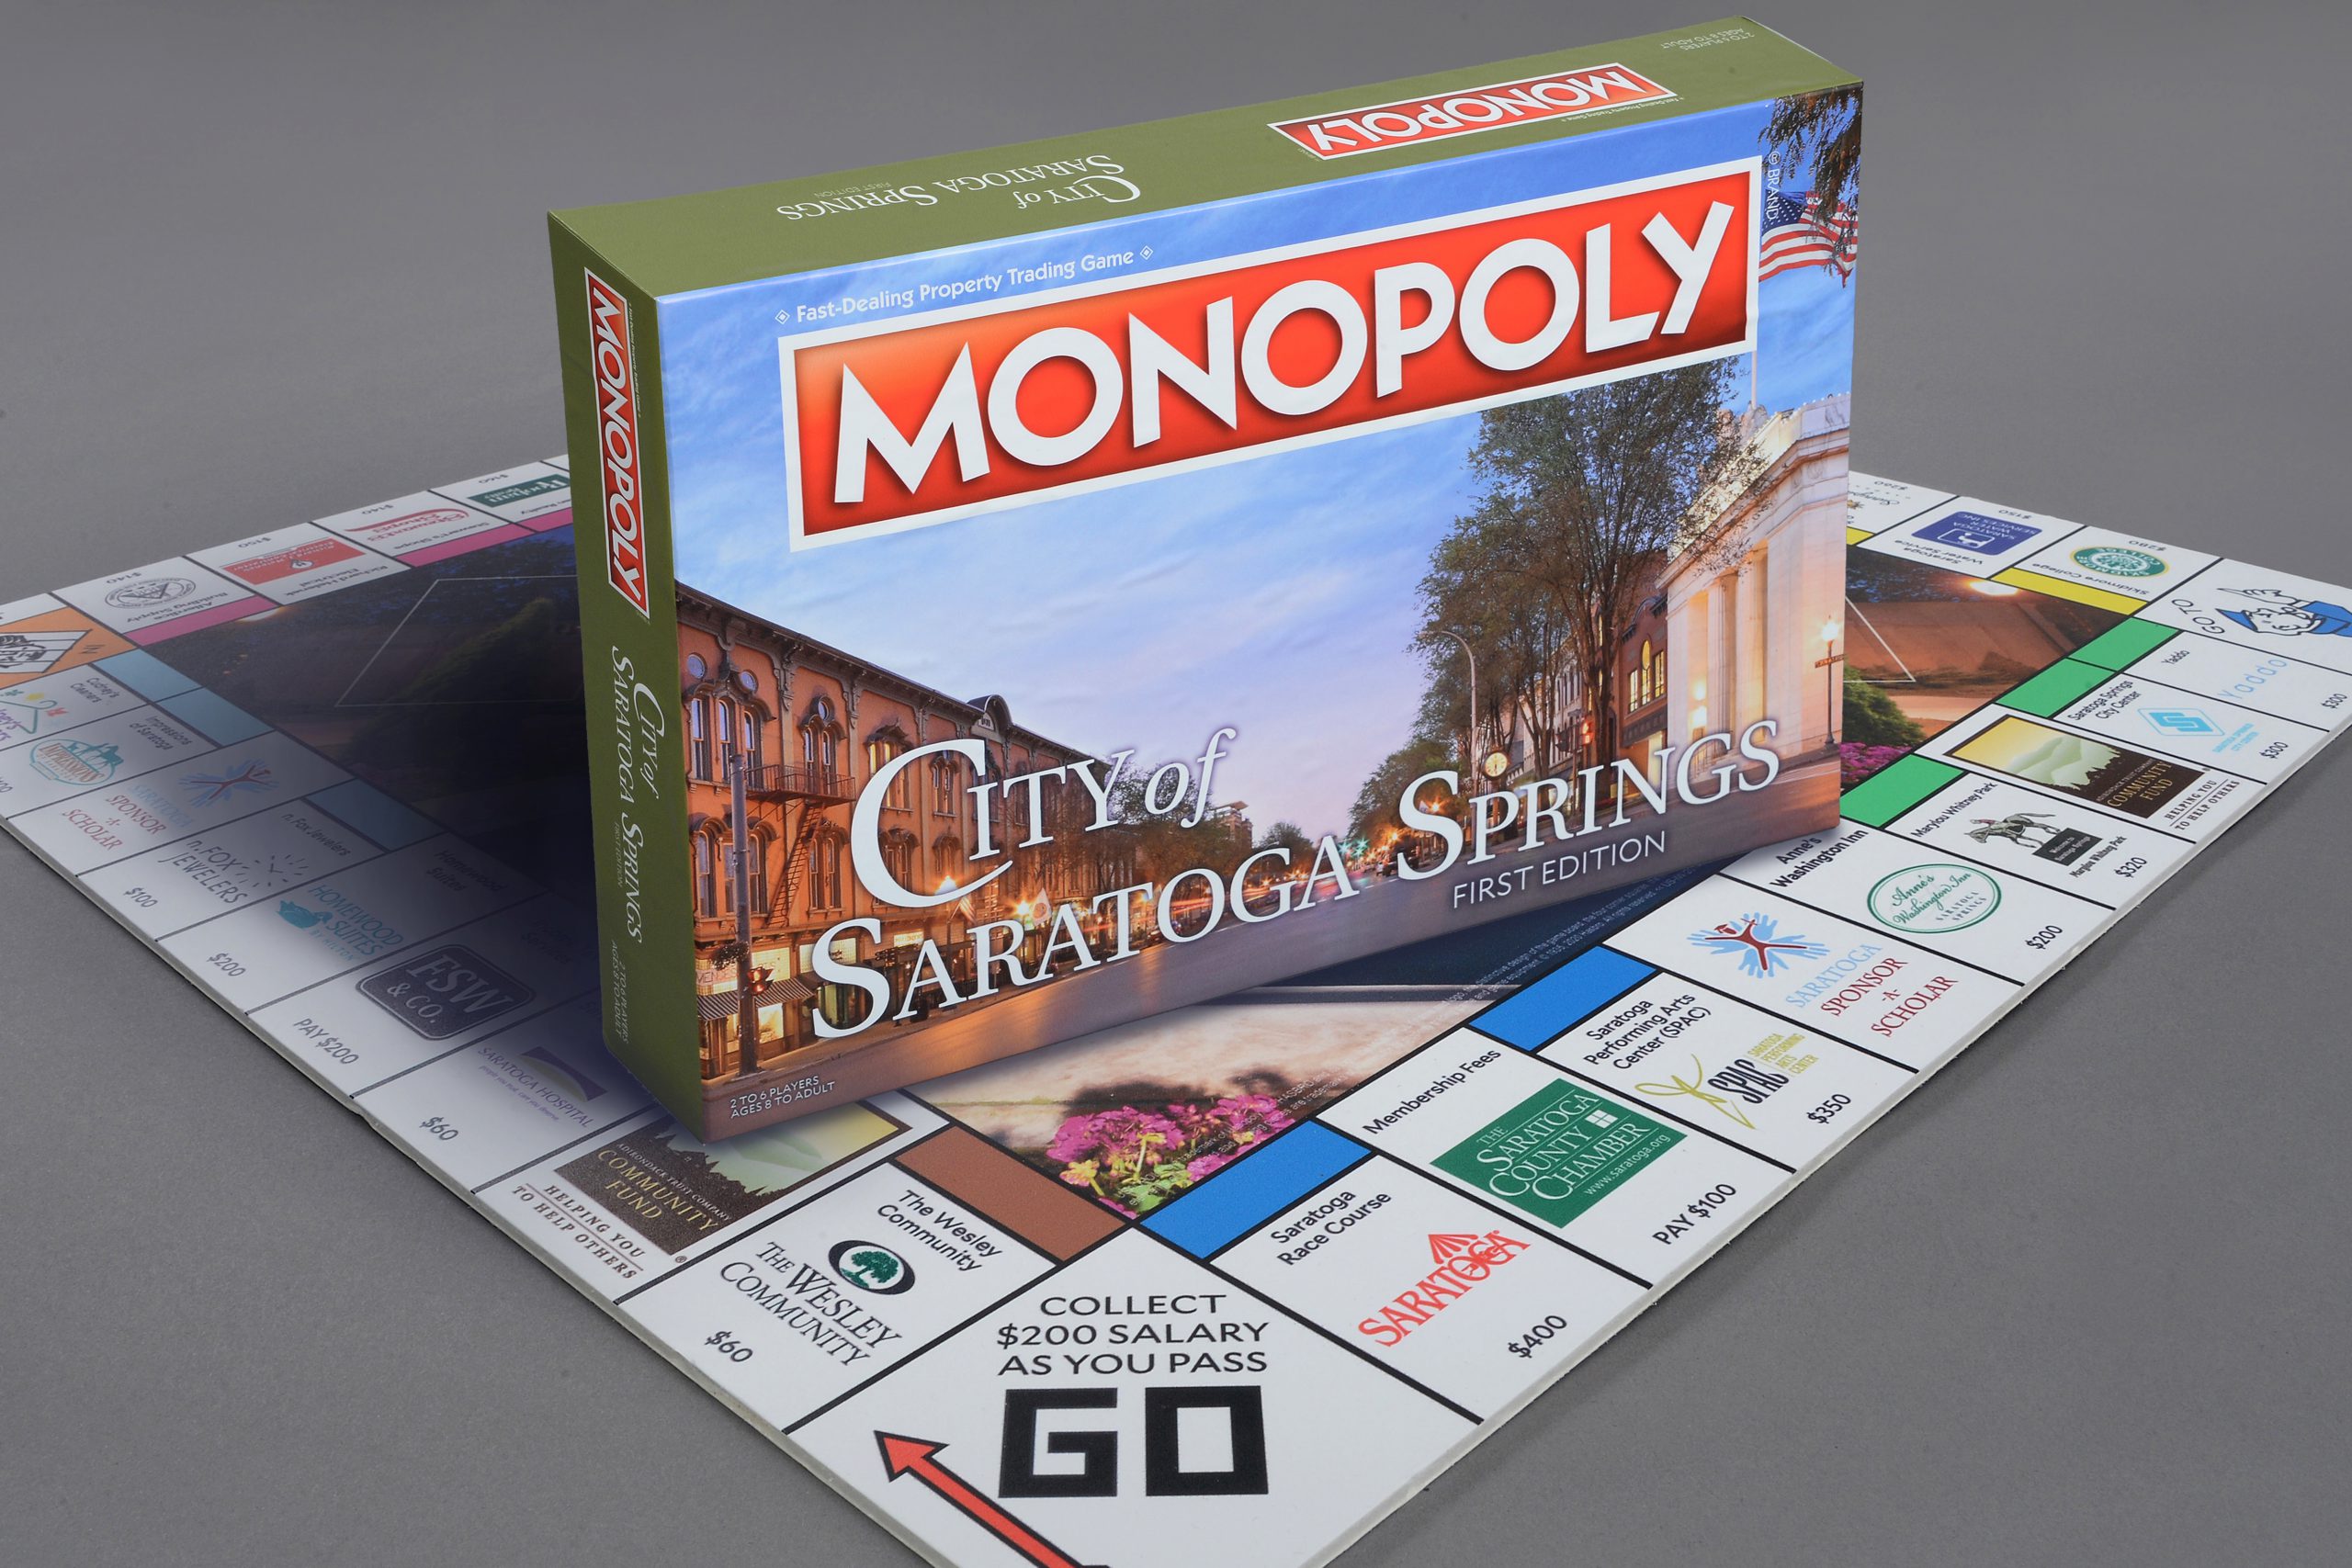 play ultimate monopoly online